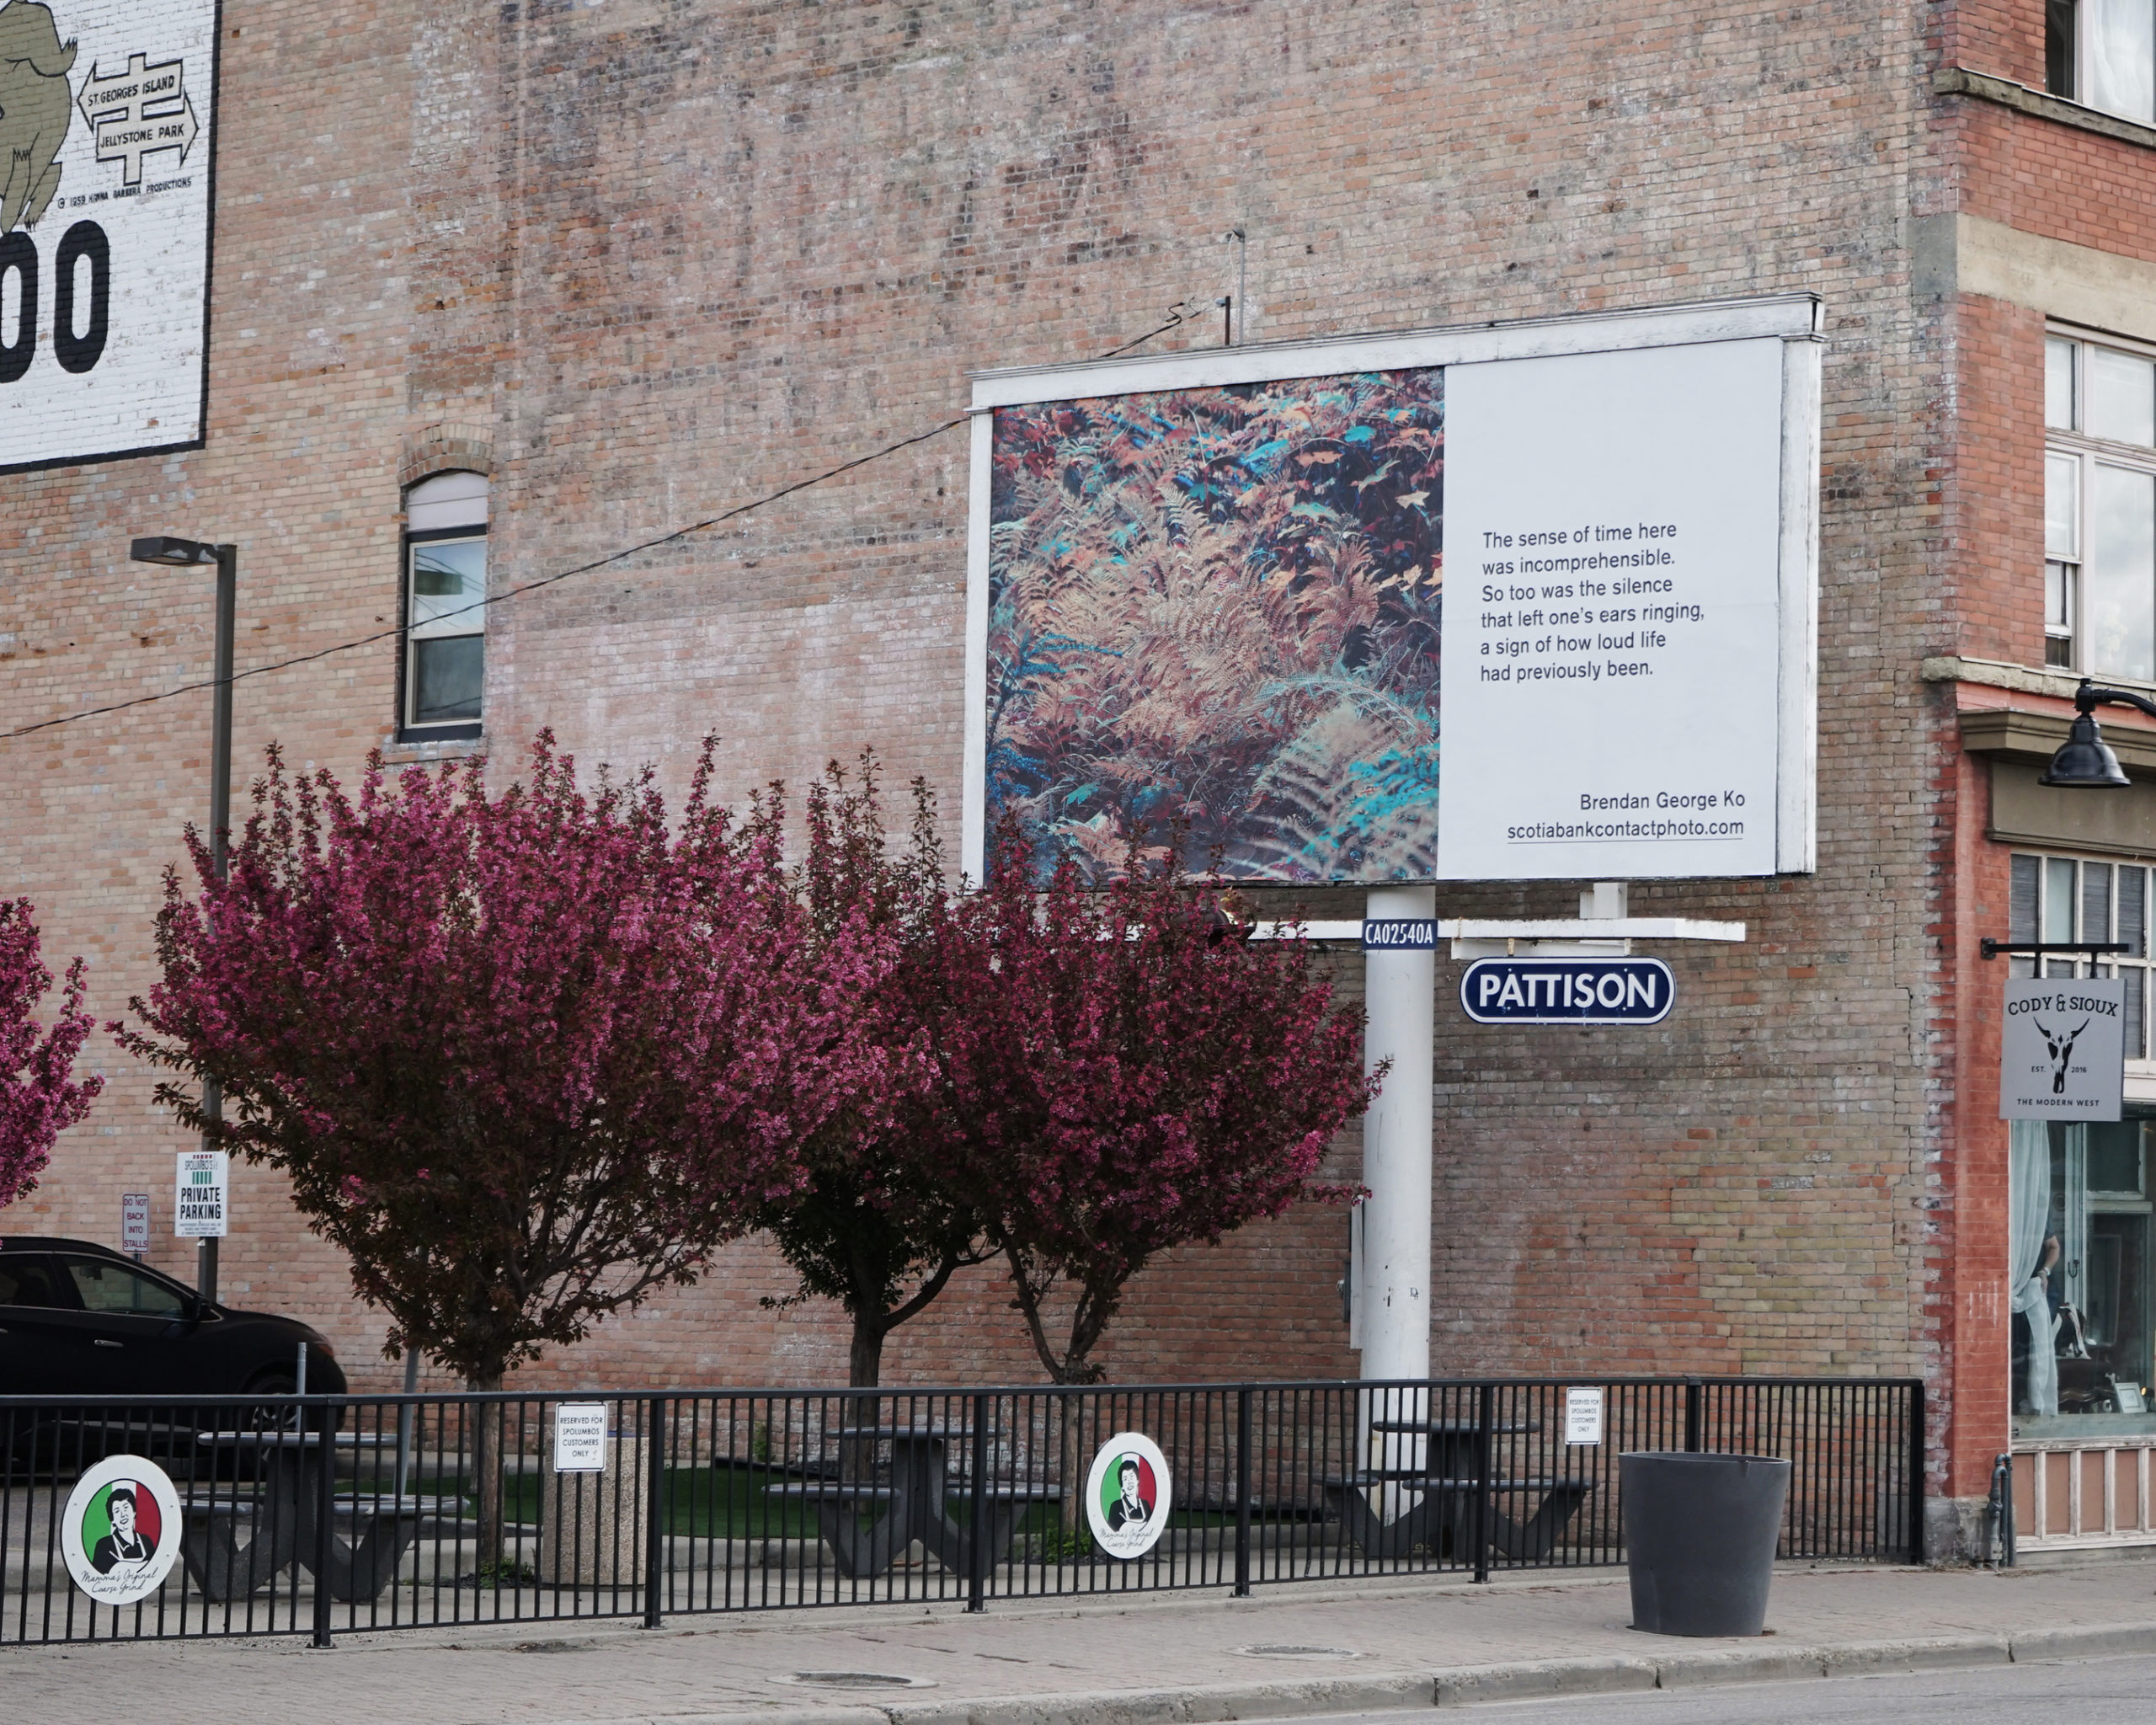     Brendan George Ko, The Forest is Wired for Wisdom, installation on billboards in Calgary and 9 other Canadian cities, 2022. Courtesy of the artist and CONTACT. Photo: Chelsee Ivan

